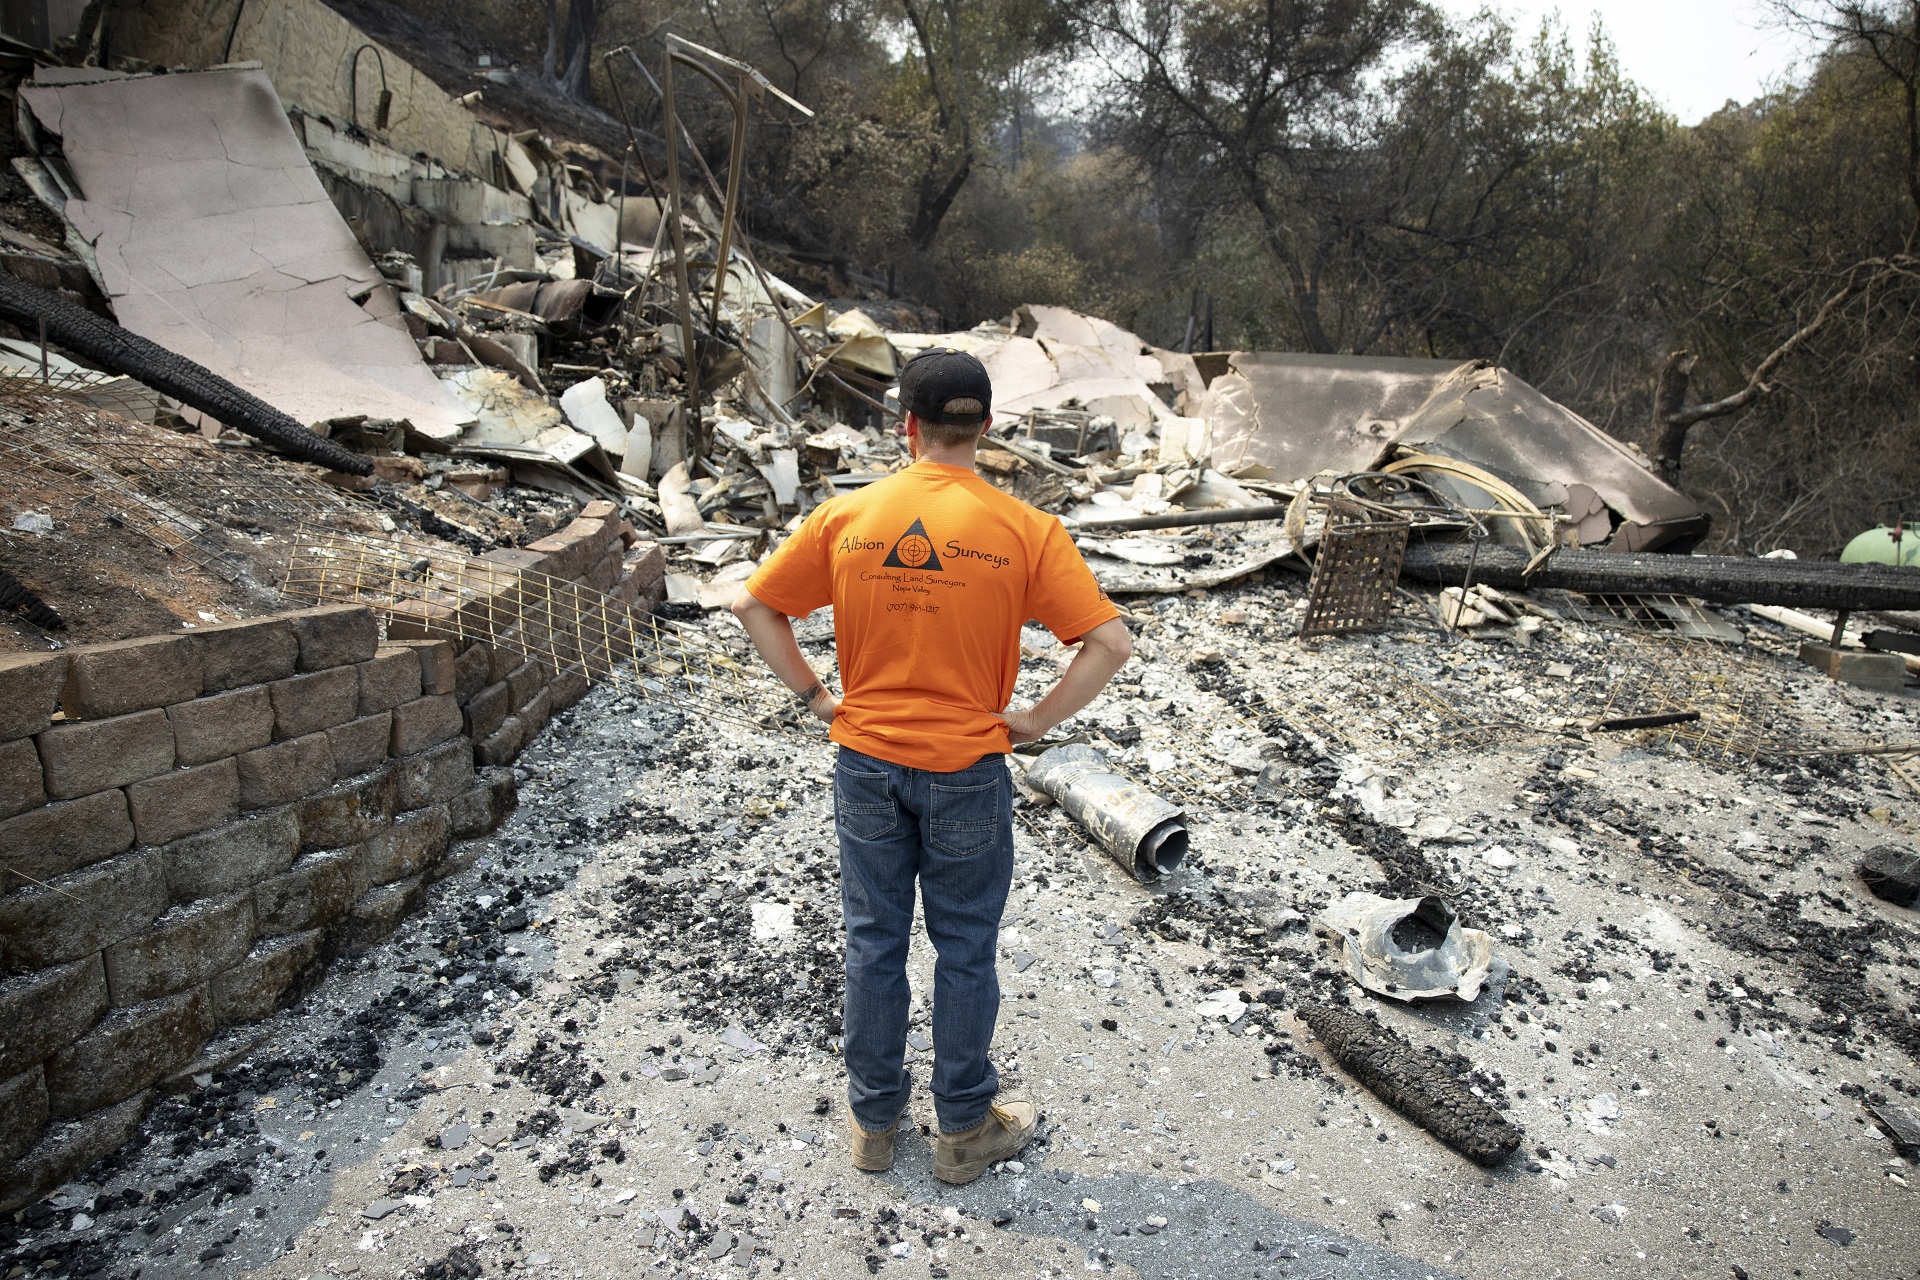 epa08623655 Gary Pratt inspects the ruins of his home at Spanish Flats Mobile Villa Park, after the LNU Lightning Complex fires past through, near Lake Berryessa, California, USA, 24 August 2020. The LNU Lightning Complex fires have burnt more than 350,000 acres across five counties.  EPA/PETER DASILVA